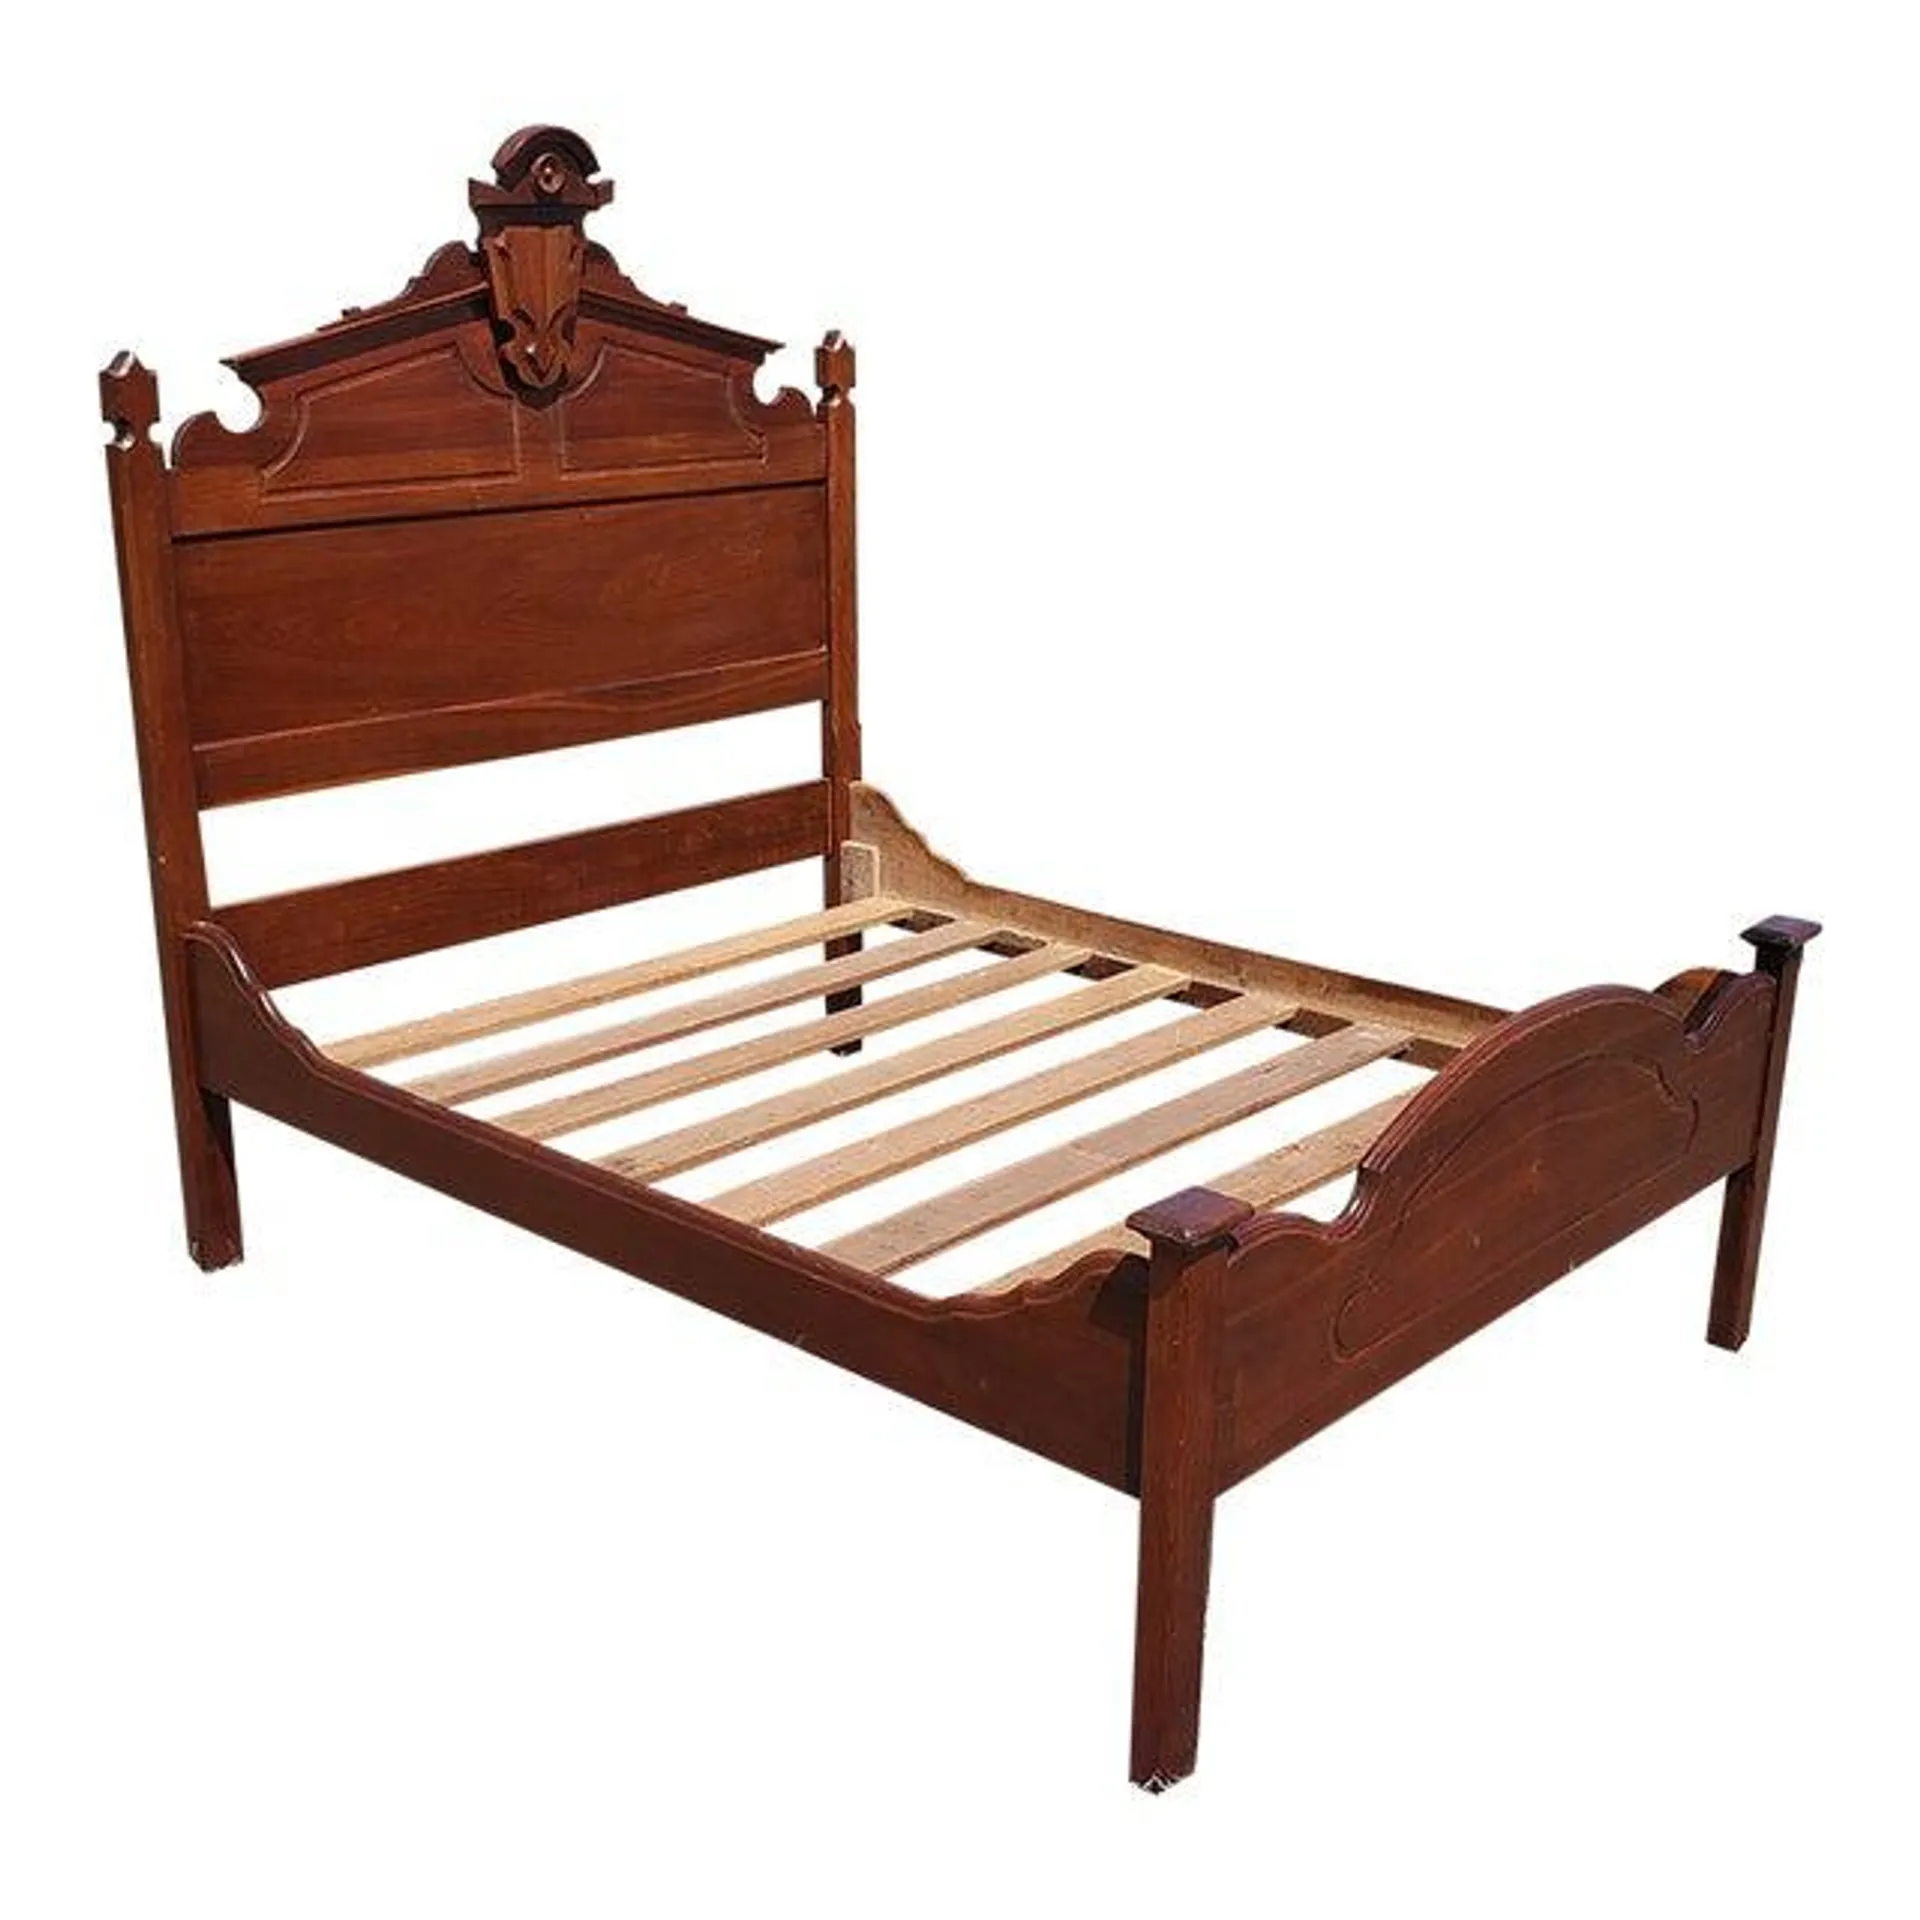 Late 19th Century Antique Victorian / Eastlake Style Wooden Full Size Bed Frame